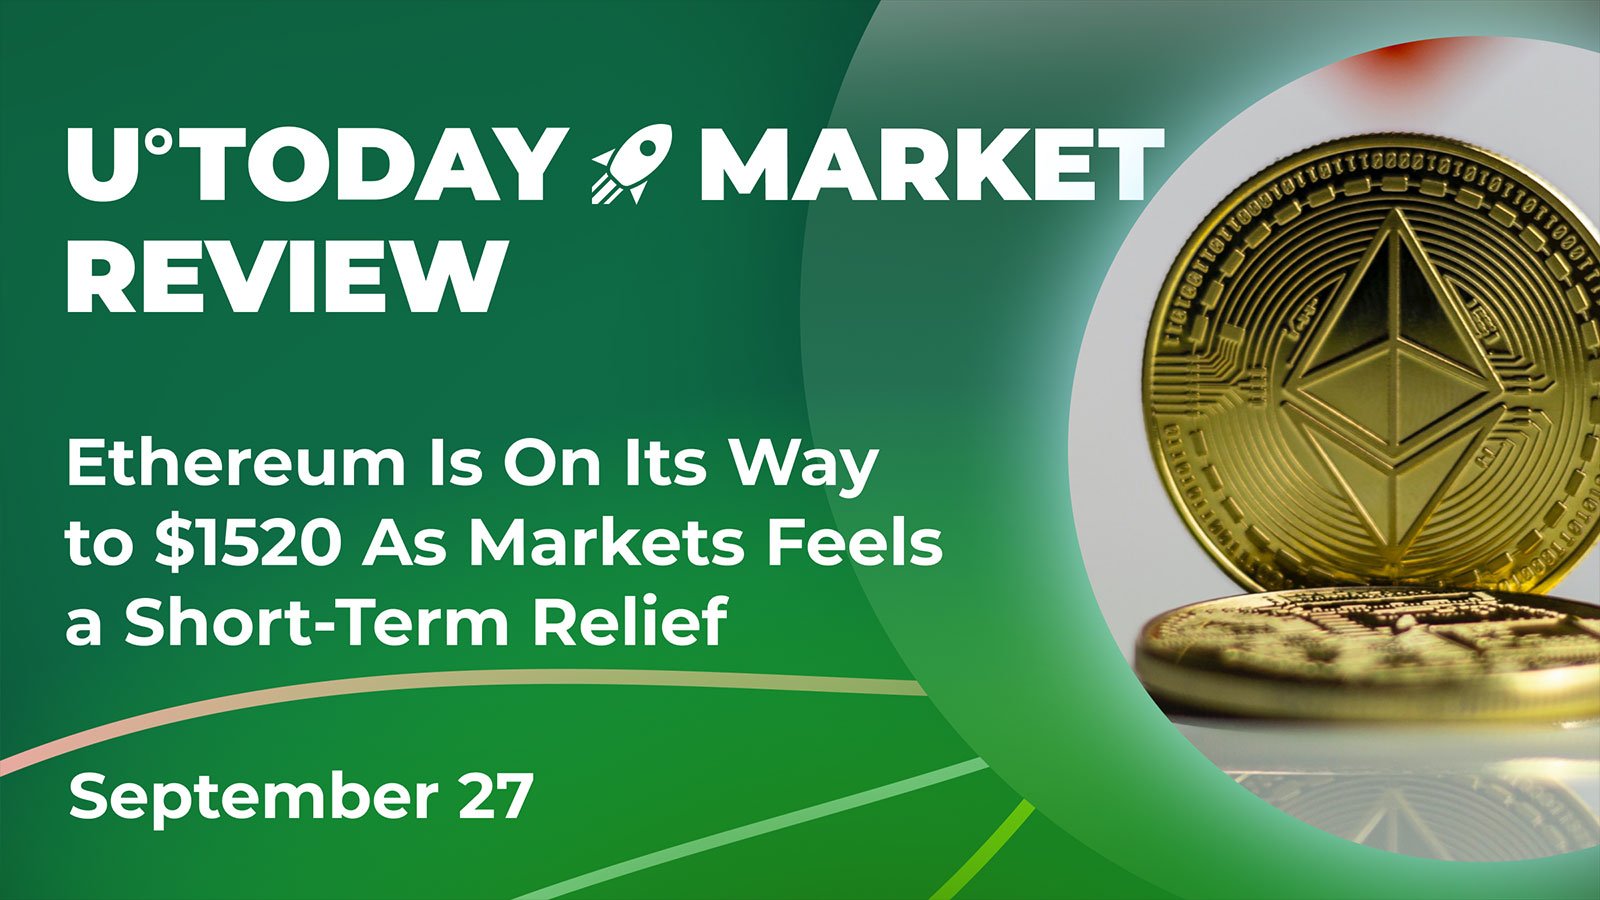 Ethereum Is On Its Way to $1520 As Markets Feels a Short-Term Relief: Crypto Market Review, September 27